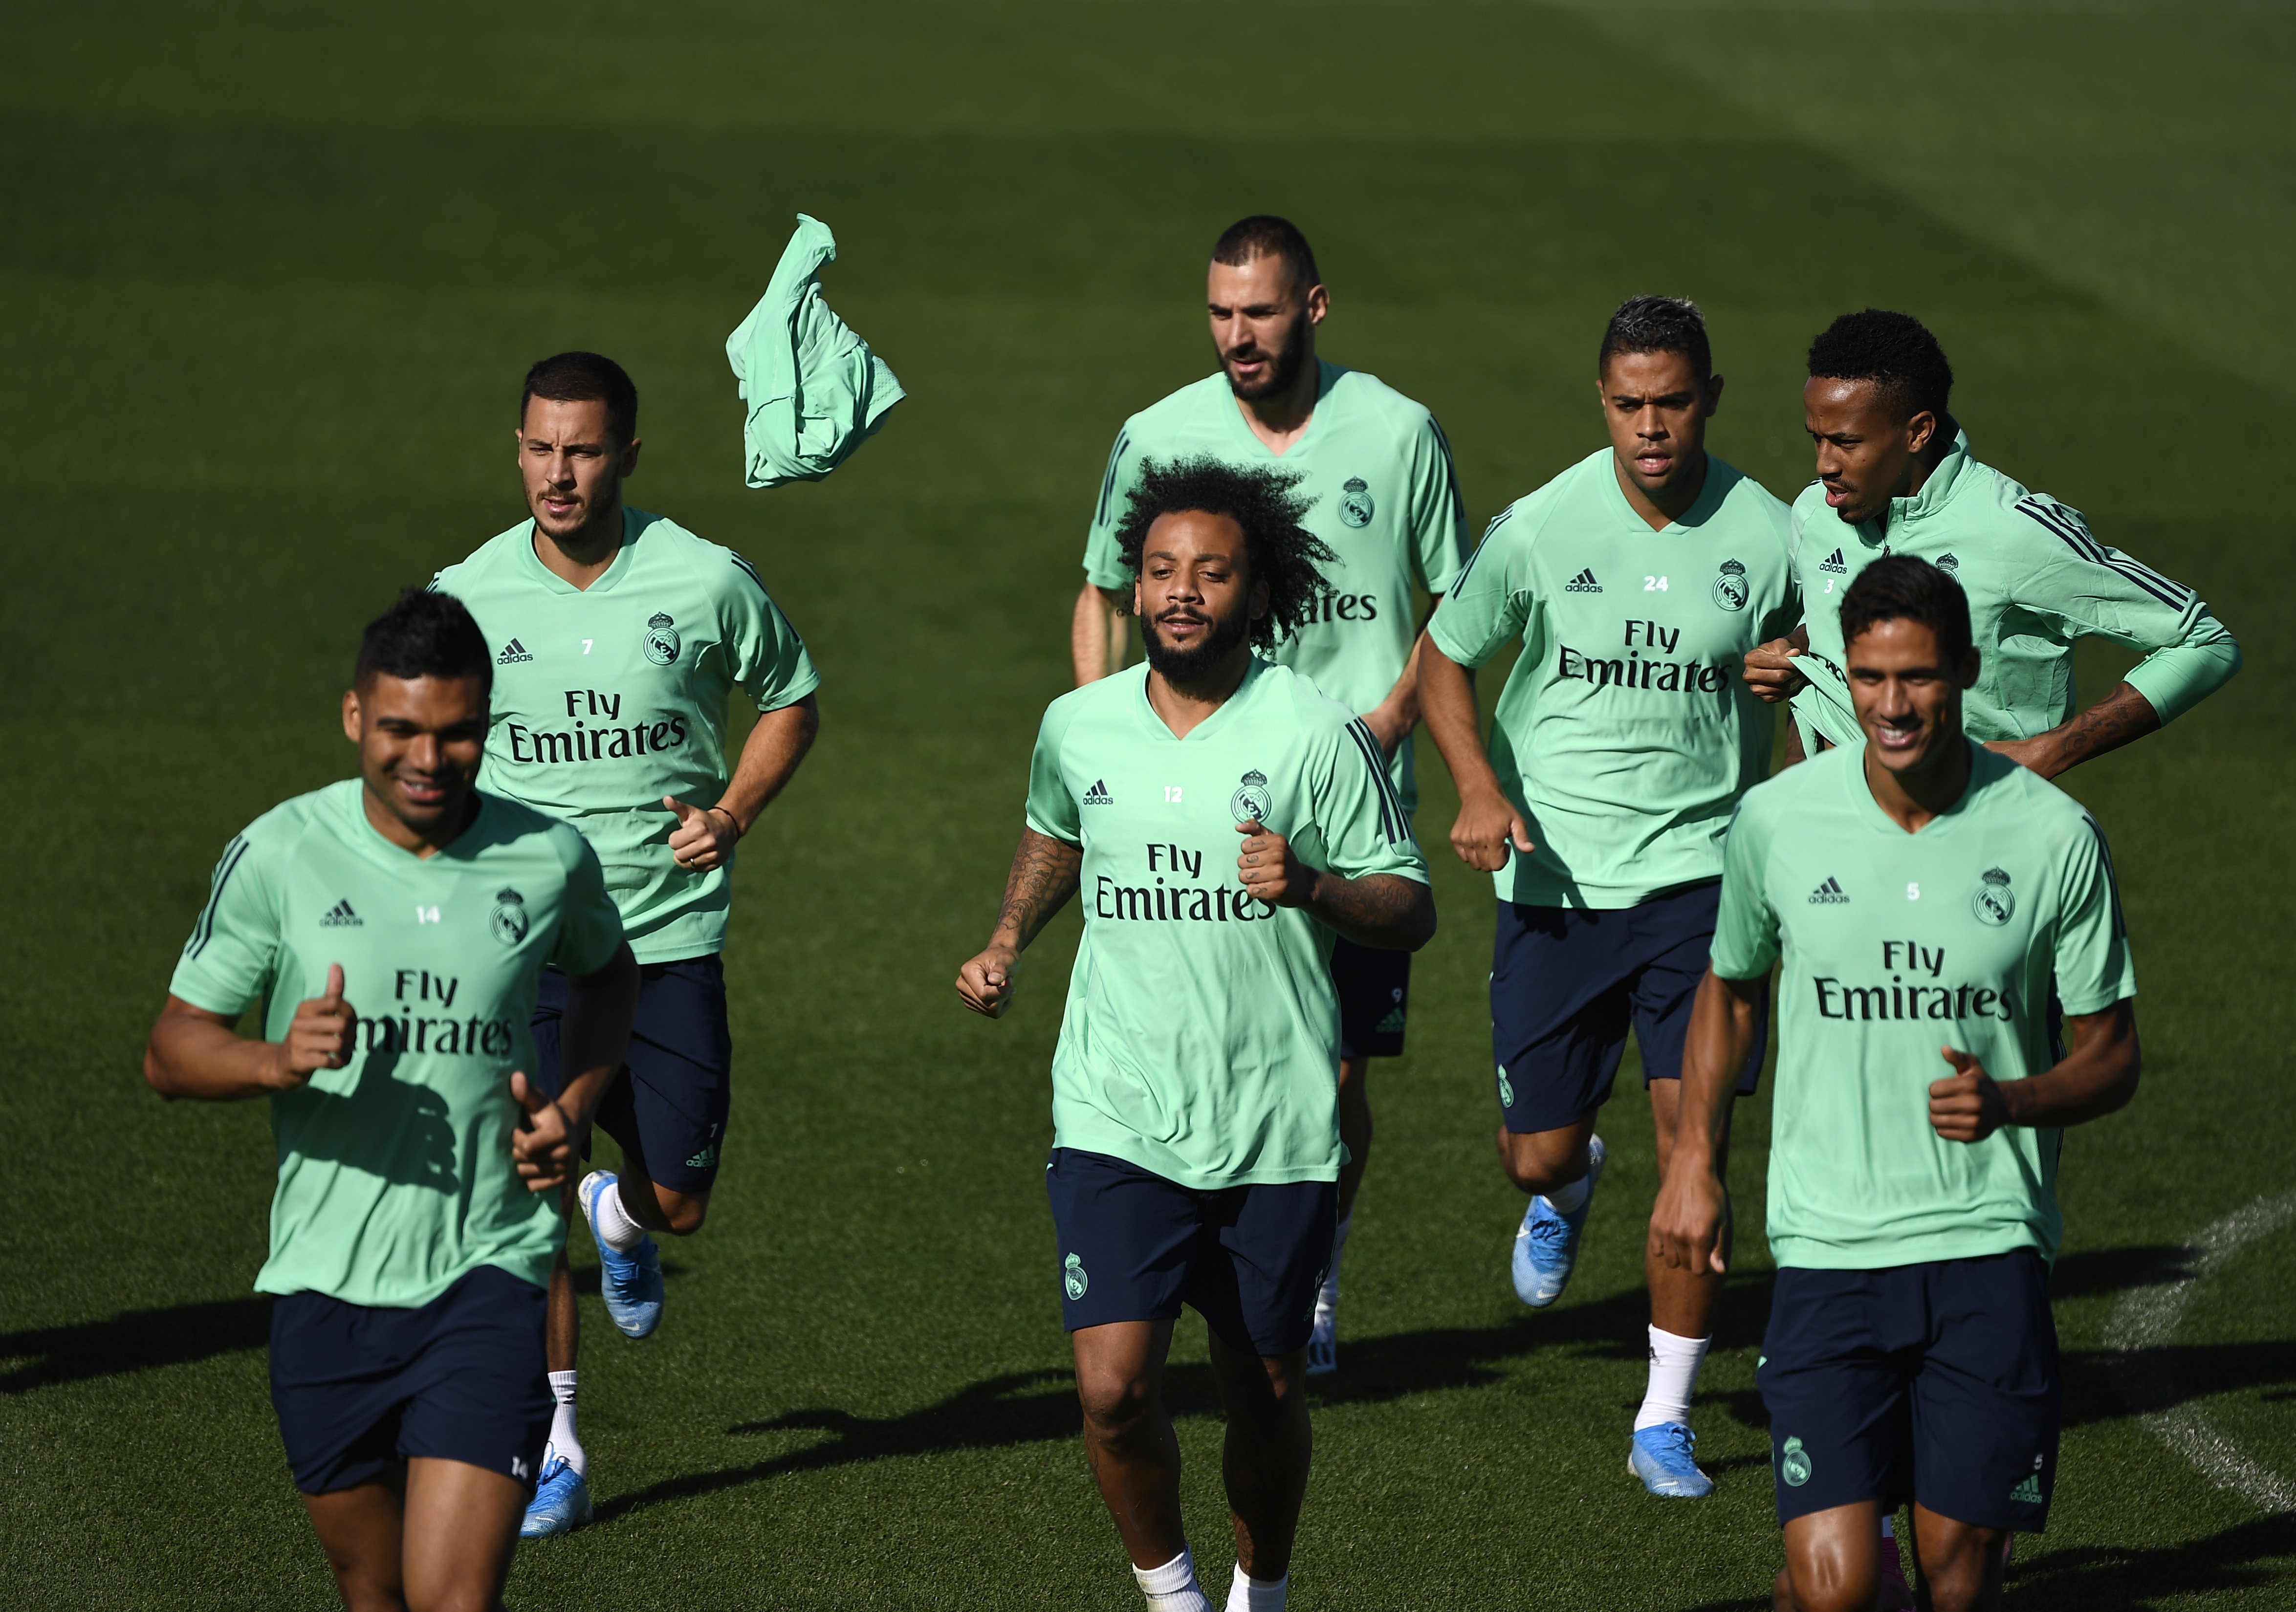 (FromL) Real Madrid's Brazilian midfielder Casemiro, Real Madrid's Belgian forward Eden Hazard, Real Madrid's Brazilian defender Marcelo, Real Madrid's French forward Karim Benzema, Real Madrid's Dominicans forward Mariano Diaz Real Madrid's Brazilian defender Eder Militao and Real Madrid's French defender Raphael Varane run during a training session at the Valdebebas training complex in the outskirts of Madrid, on September 30, 2019, on the eve of the UEFA Champions league Group A football match against Club Brugge. (Photo by PIERRE-PHILIPPE MARCOU / AFP)        (Photo credit should read PIERRE-PHILIPPE MARCOU/AFP/Getty Images)